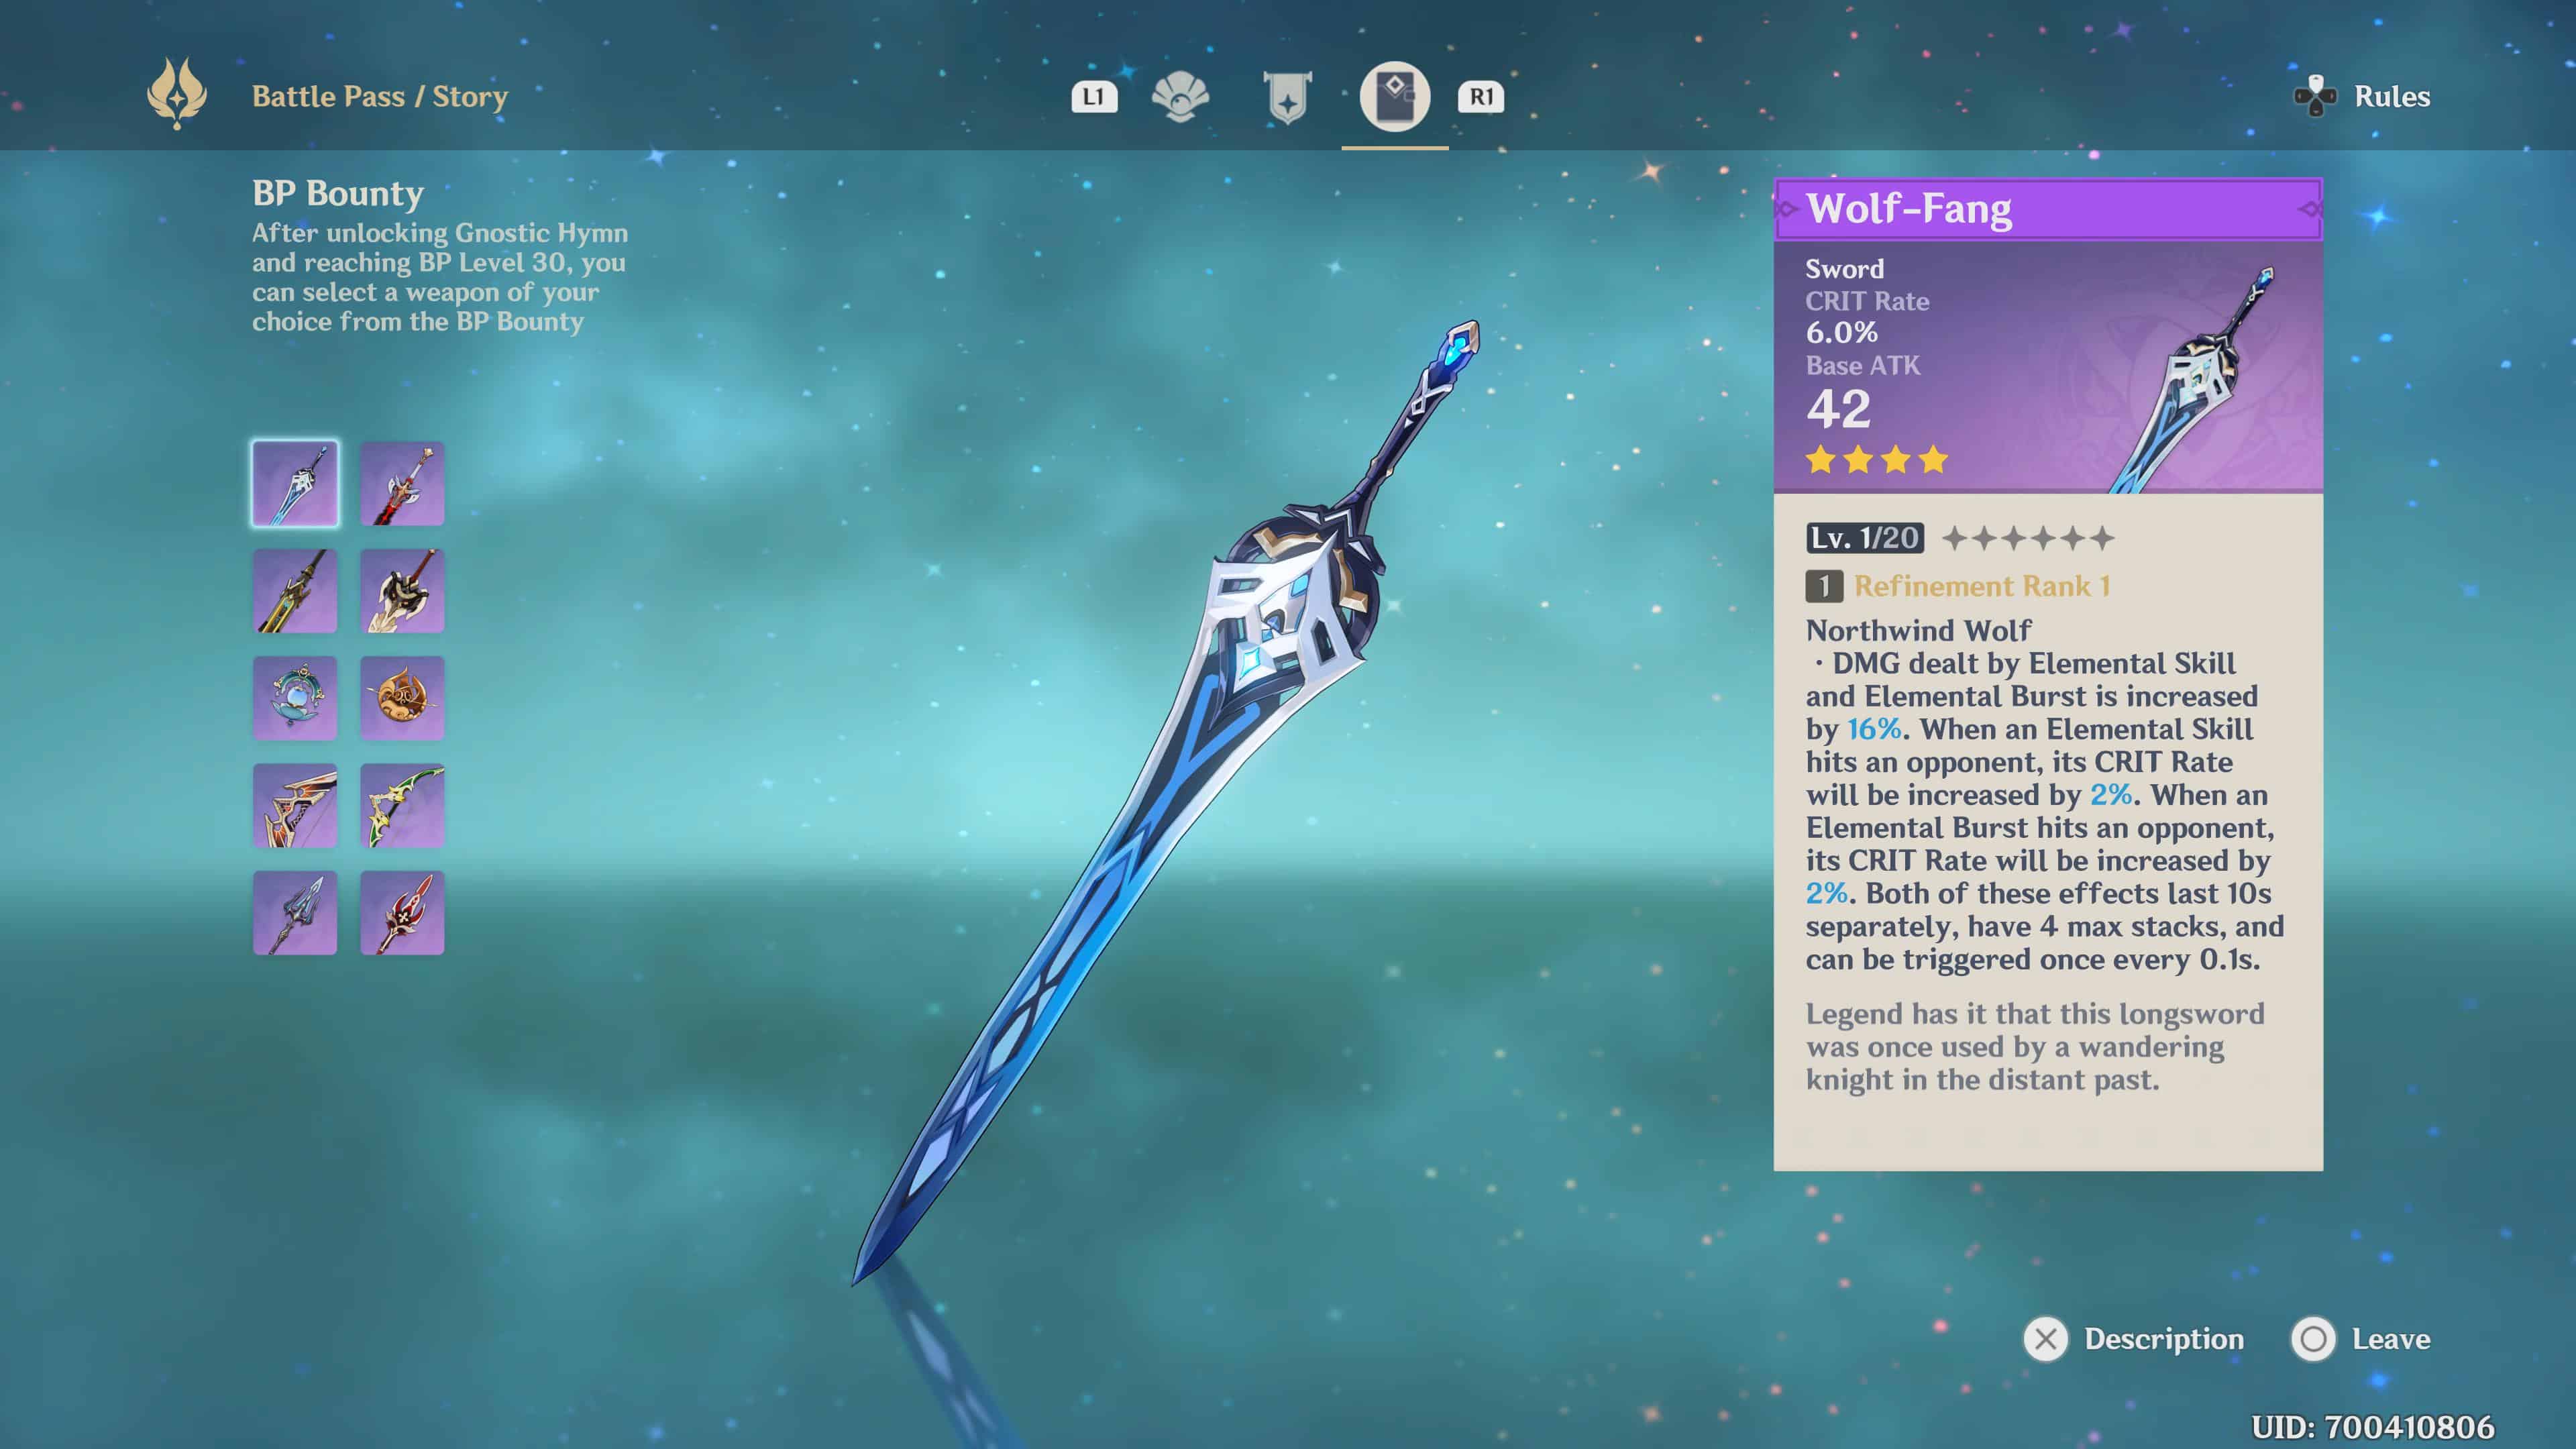 A screenshot of one of the best battle pass weapons in Genshin Impact: the Wolf-Fang